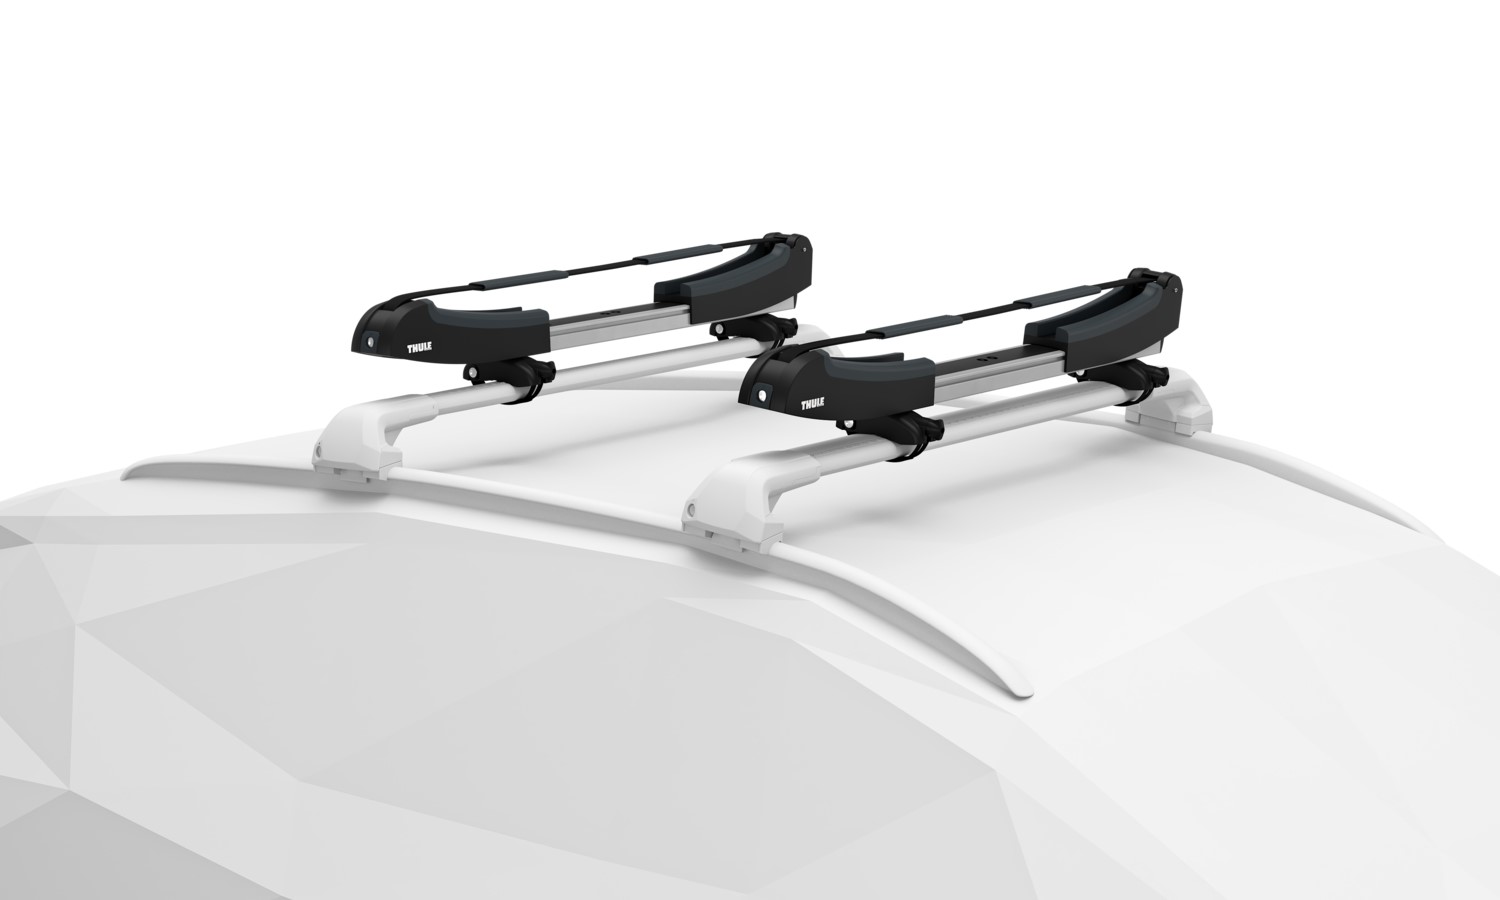 Thule 810 SUP Taxi XT Stand-Up Paddleboard carrier